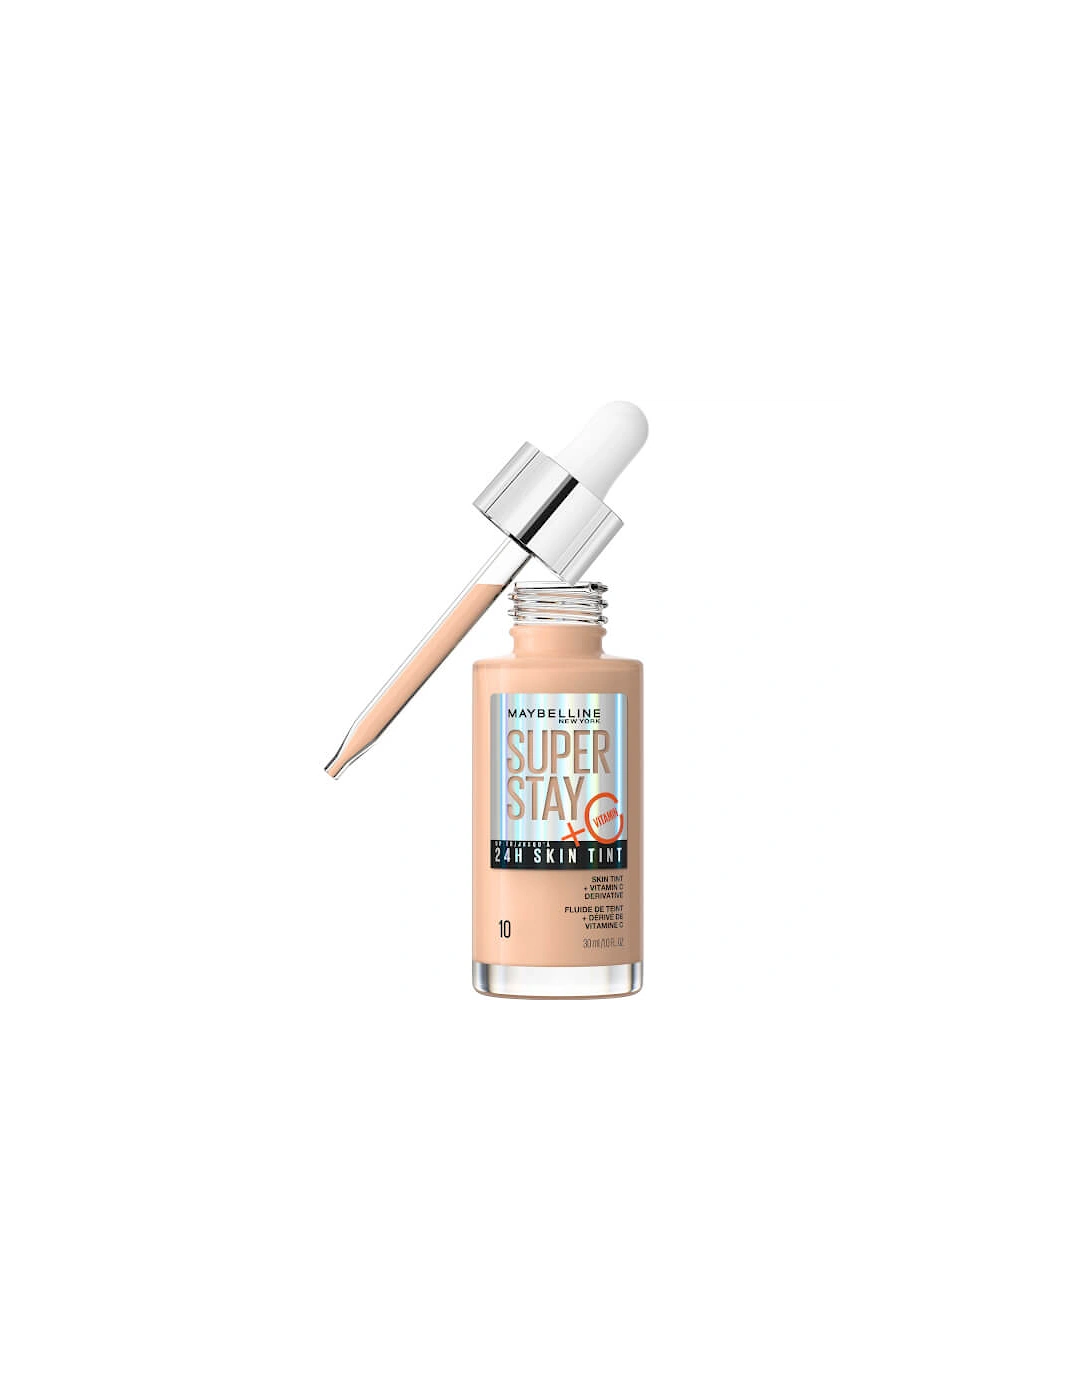 Super Stay up to 24H Skin Tint Foundation + Vitamin C - Shade 10, 2 of 1